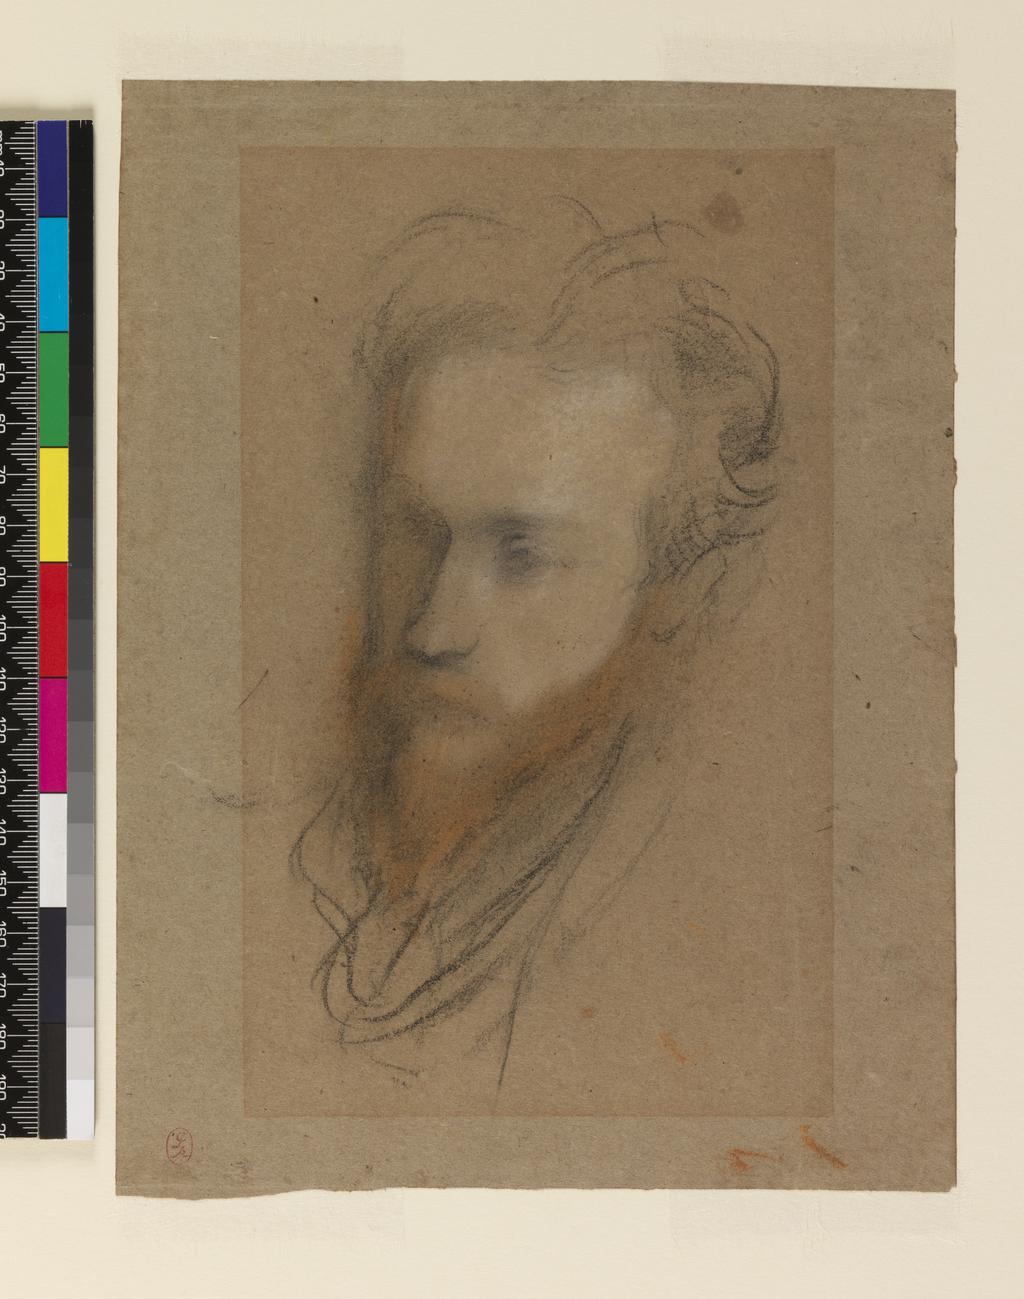 An image of Portrait study of Charles Ricketts. Rothenstein, William (British, 1872-1945). Black and red chalk, 1894. Batchelor Collection.